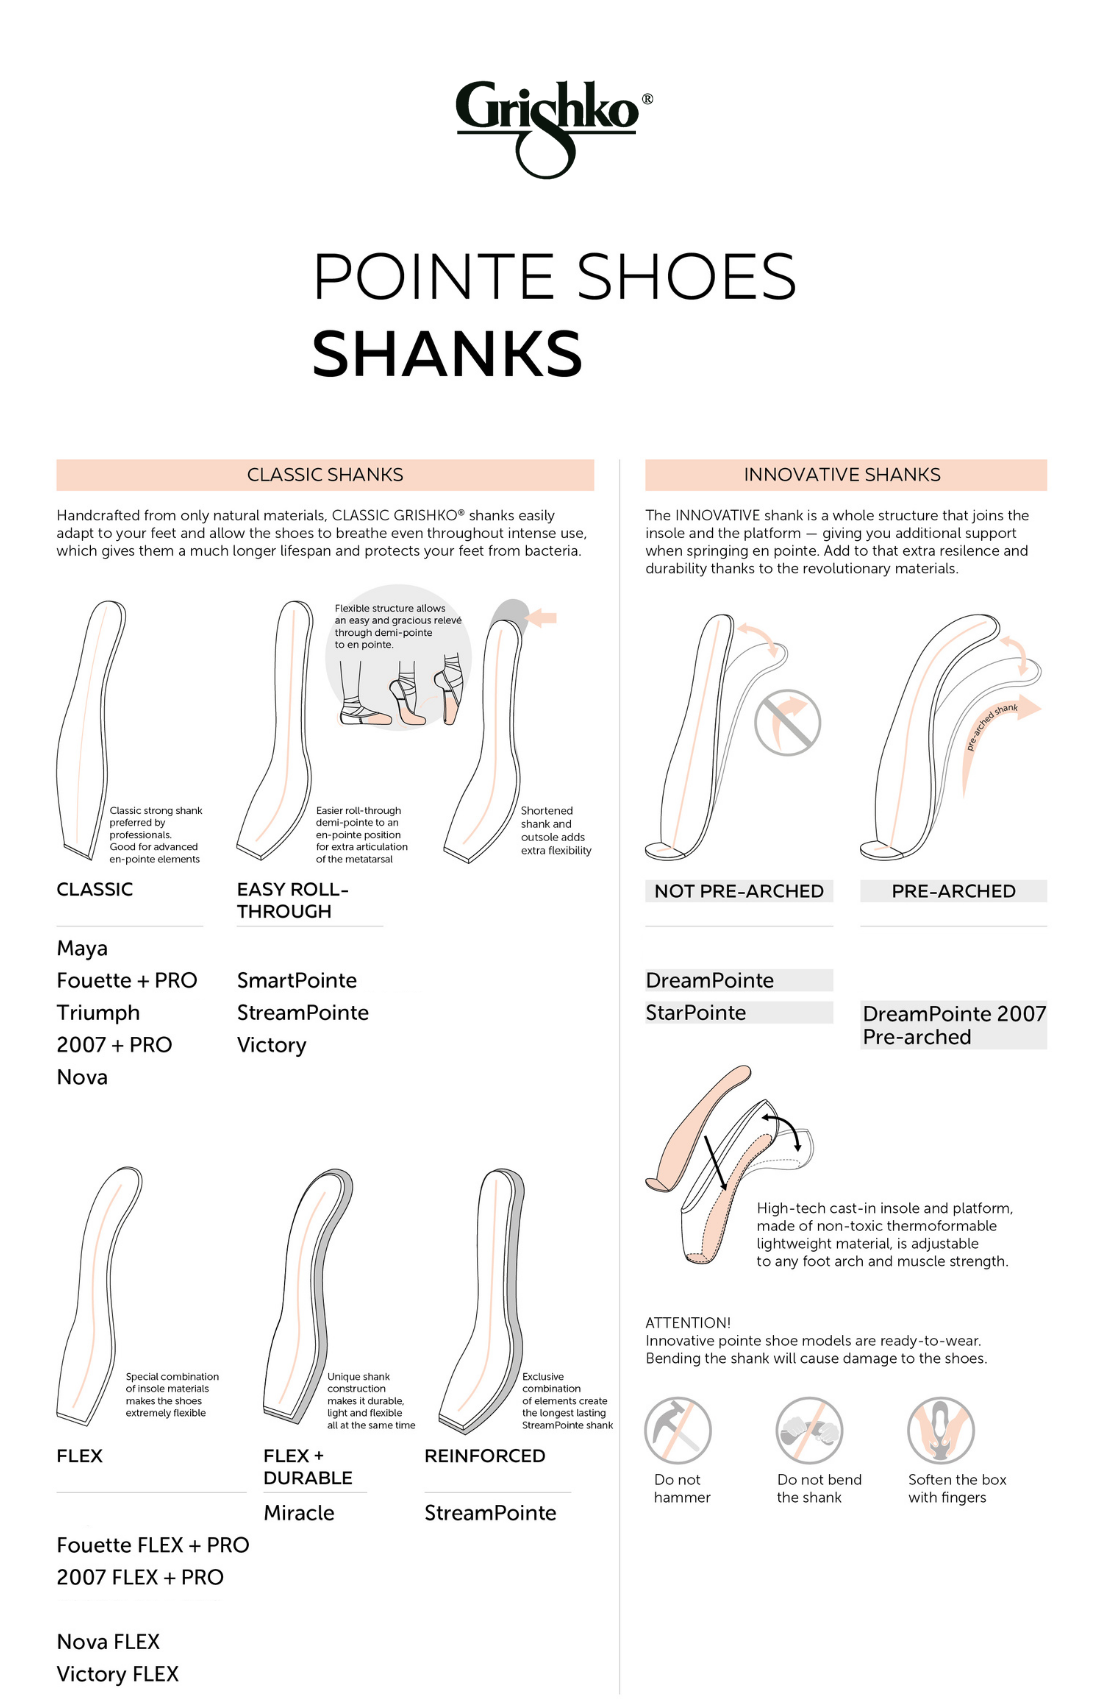 Pointe Shoes - Shanks